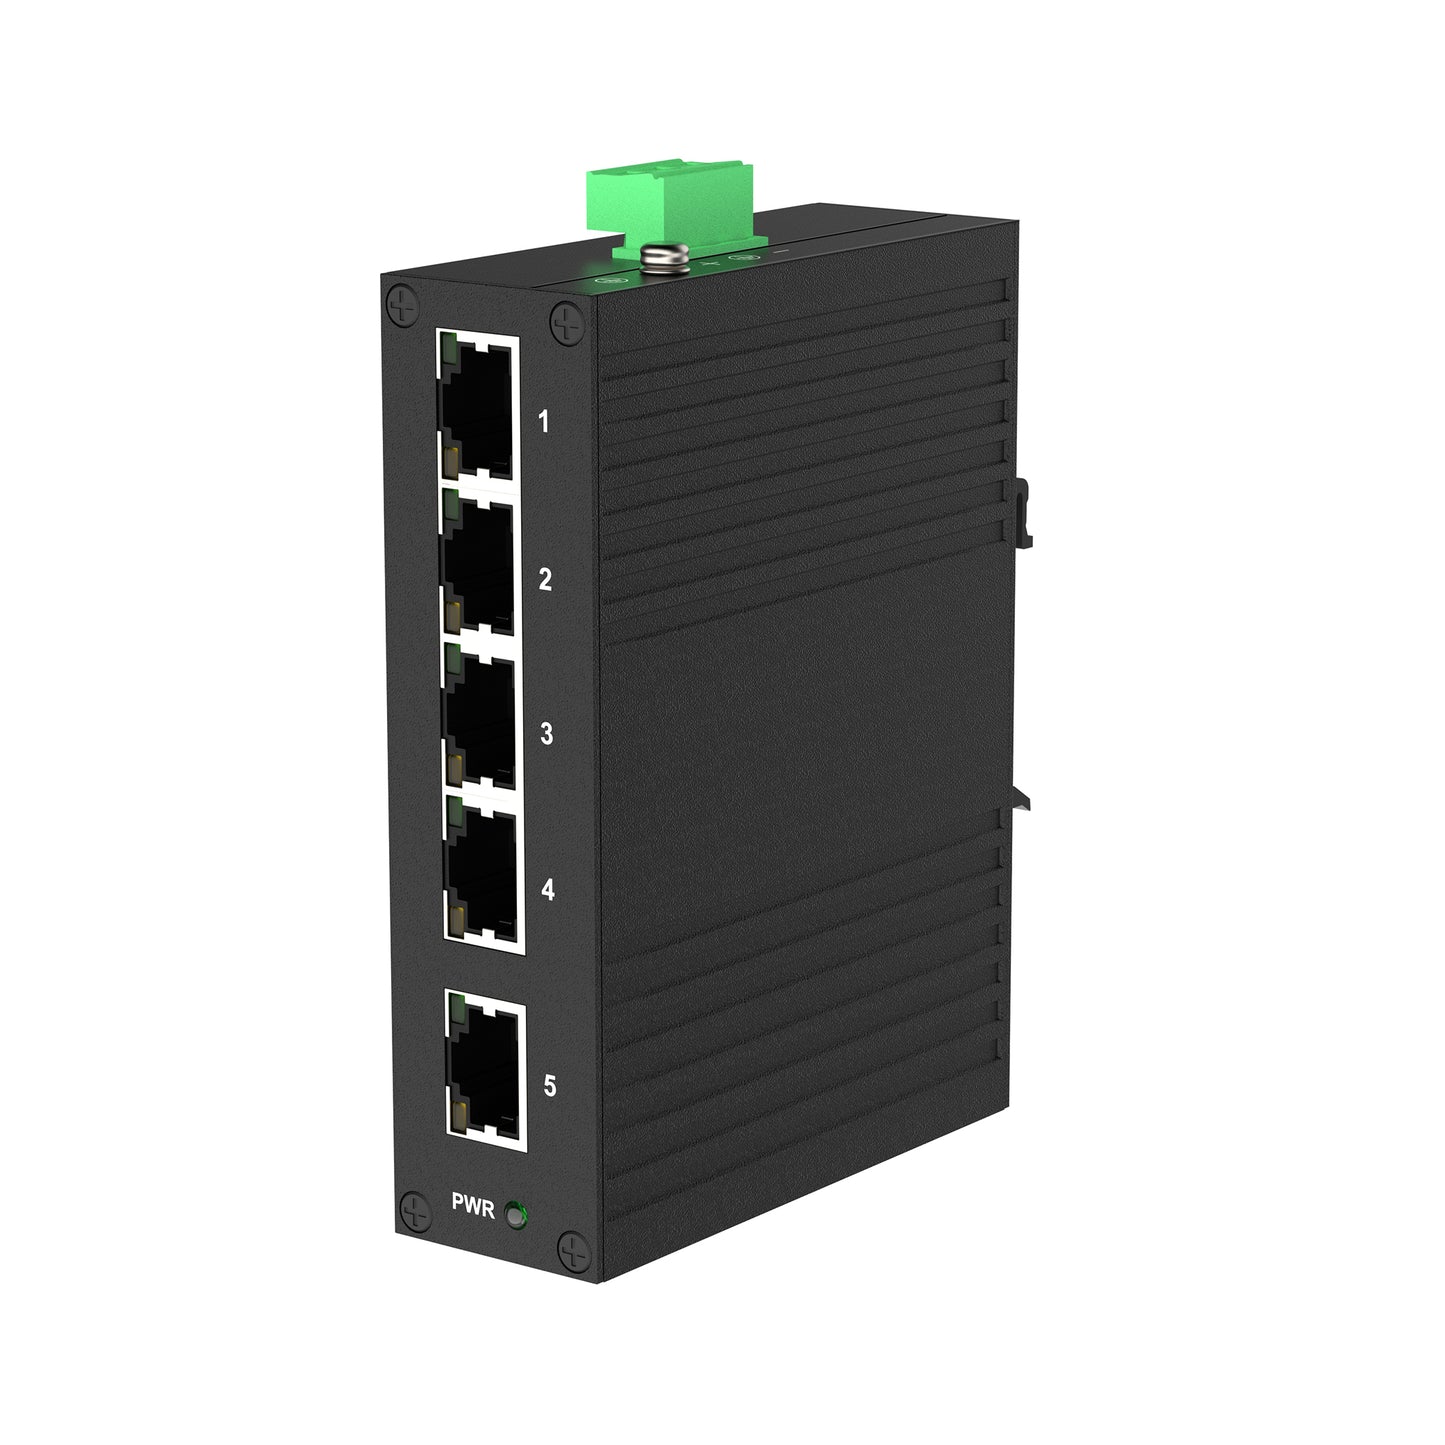 IDS1005R 5FE Din-rail Unmanaged Industrial Ethernet Switch